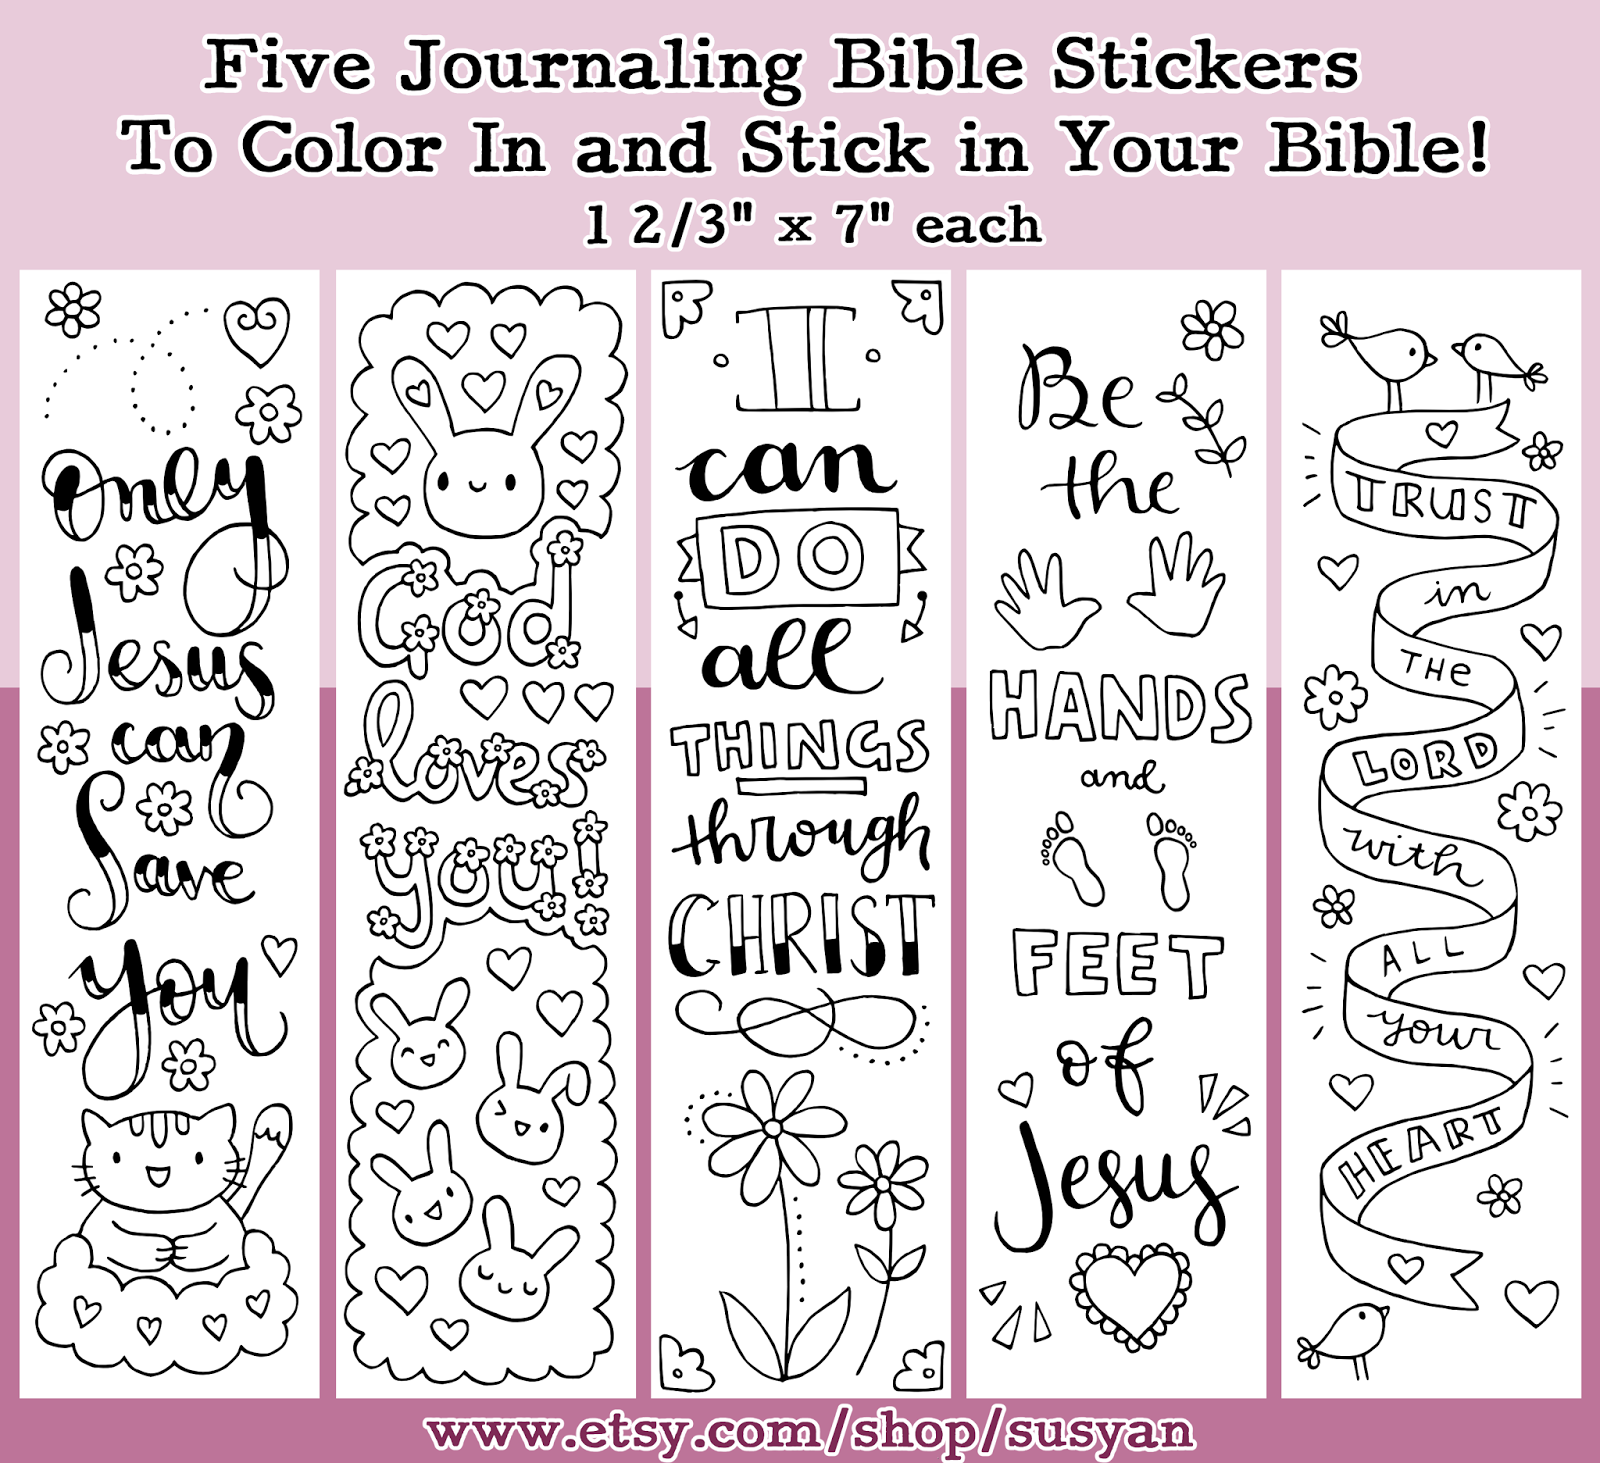 susyan-crafts-cute-color-in-journaling-bible-stickers-for-your-bible